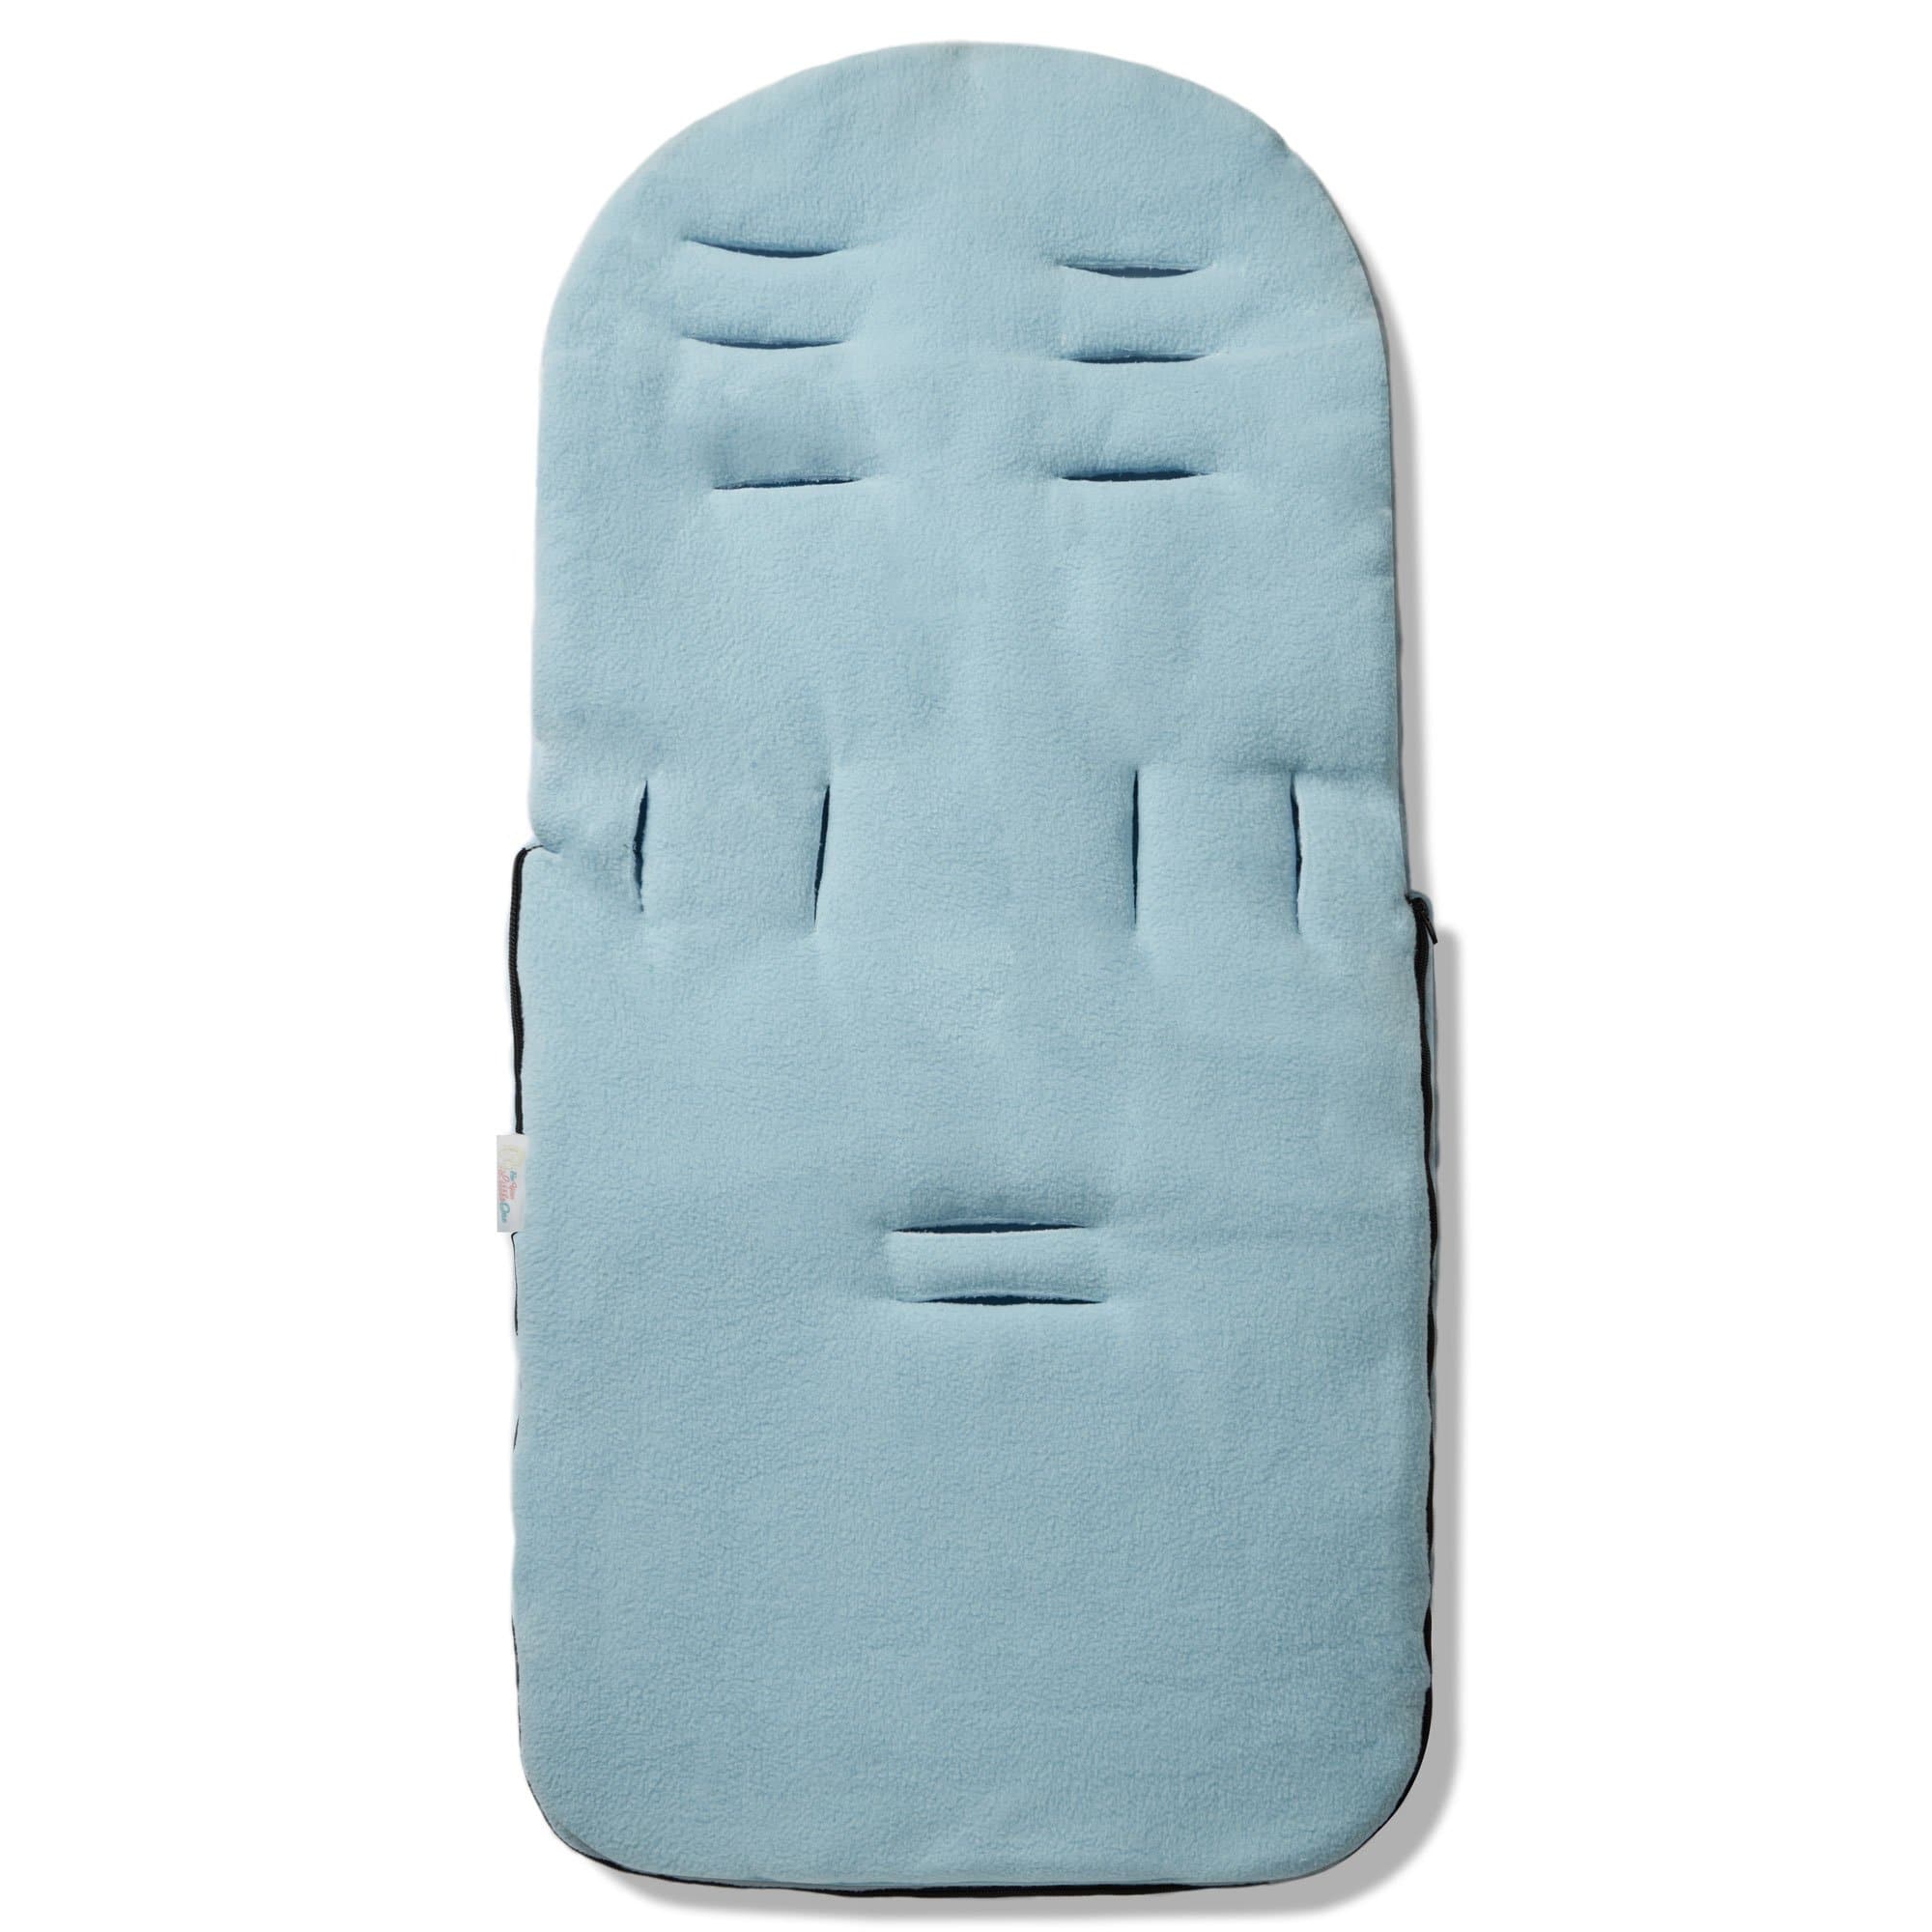 Dimple Footmuff / Cosy Toes Compatible with Babybus - For Your Little One